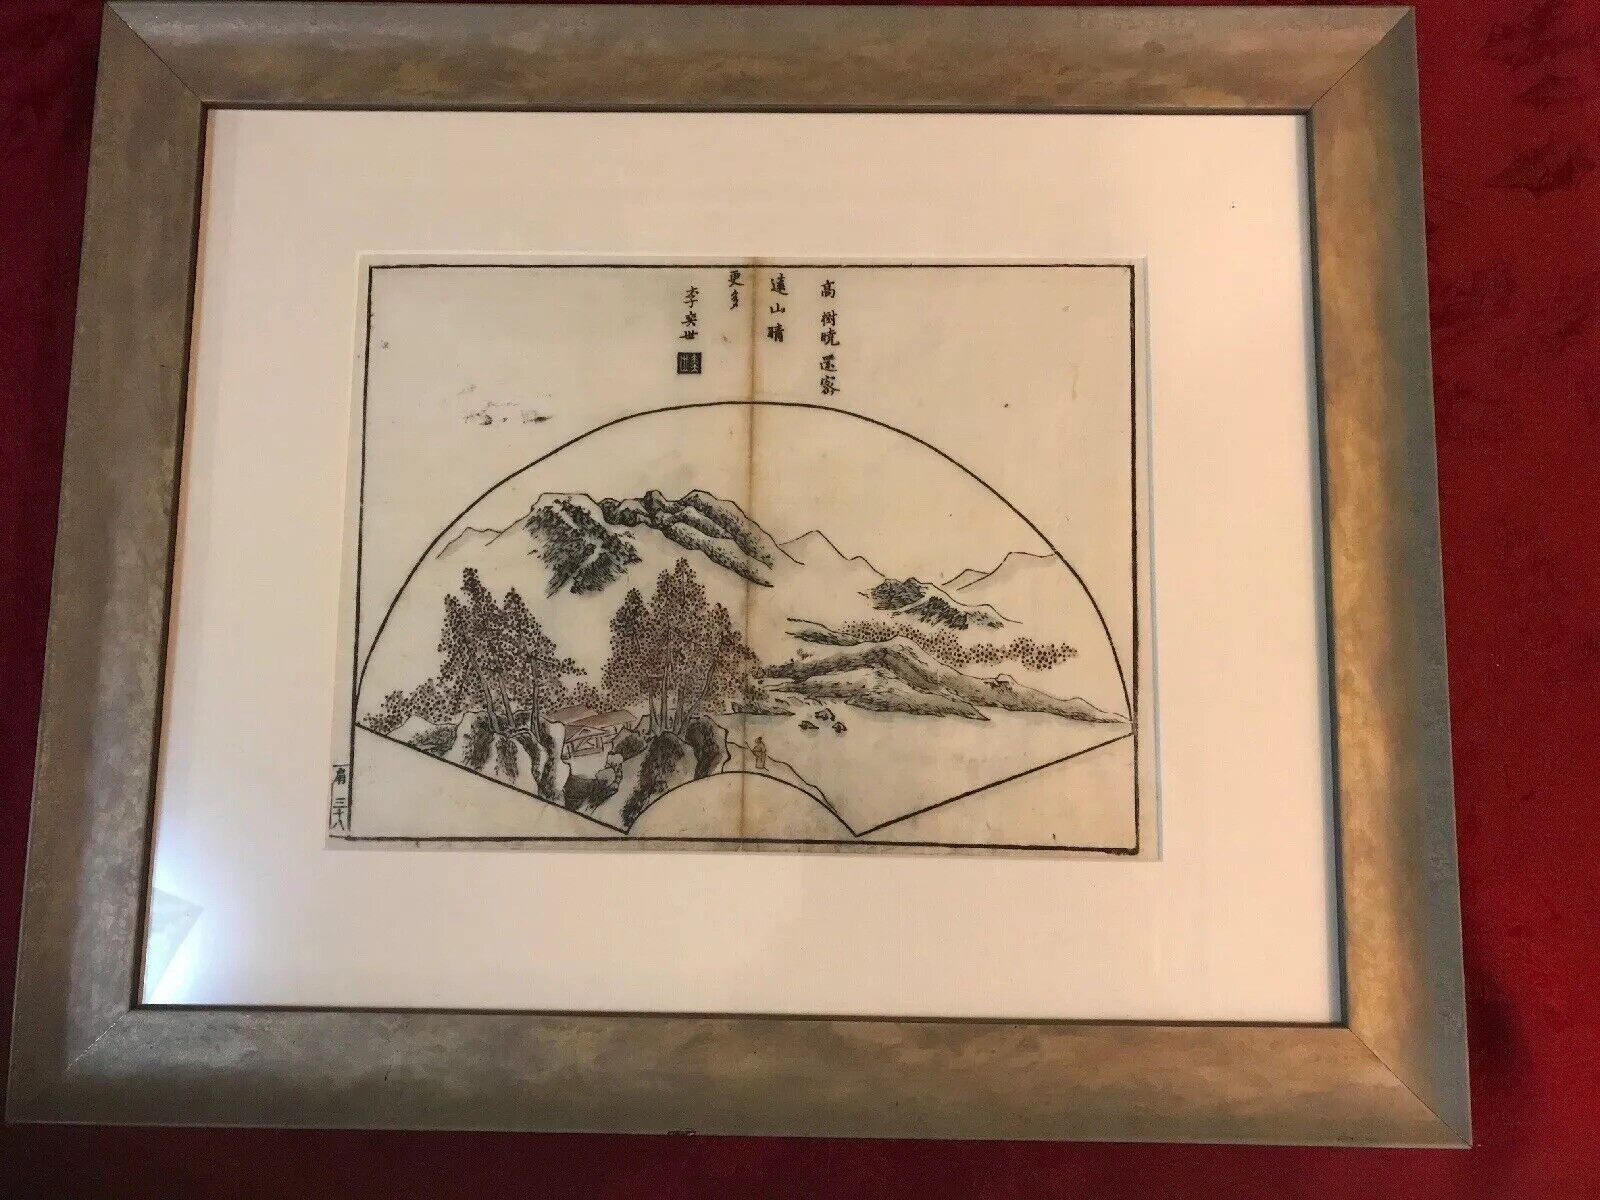 Old Chinese Calligraphy Poem Woodblock Print Fan Shaped Framed 23” X 19”